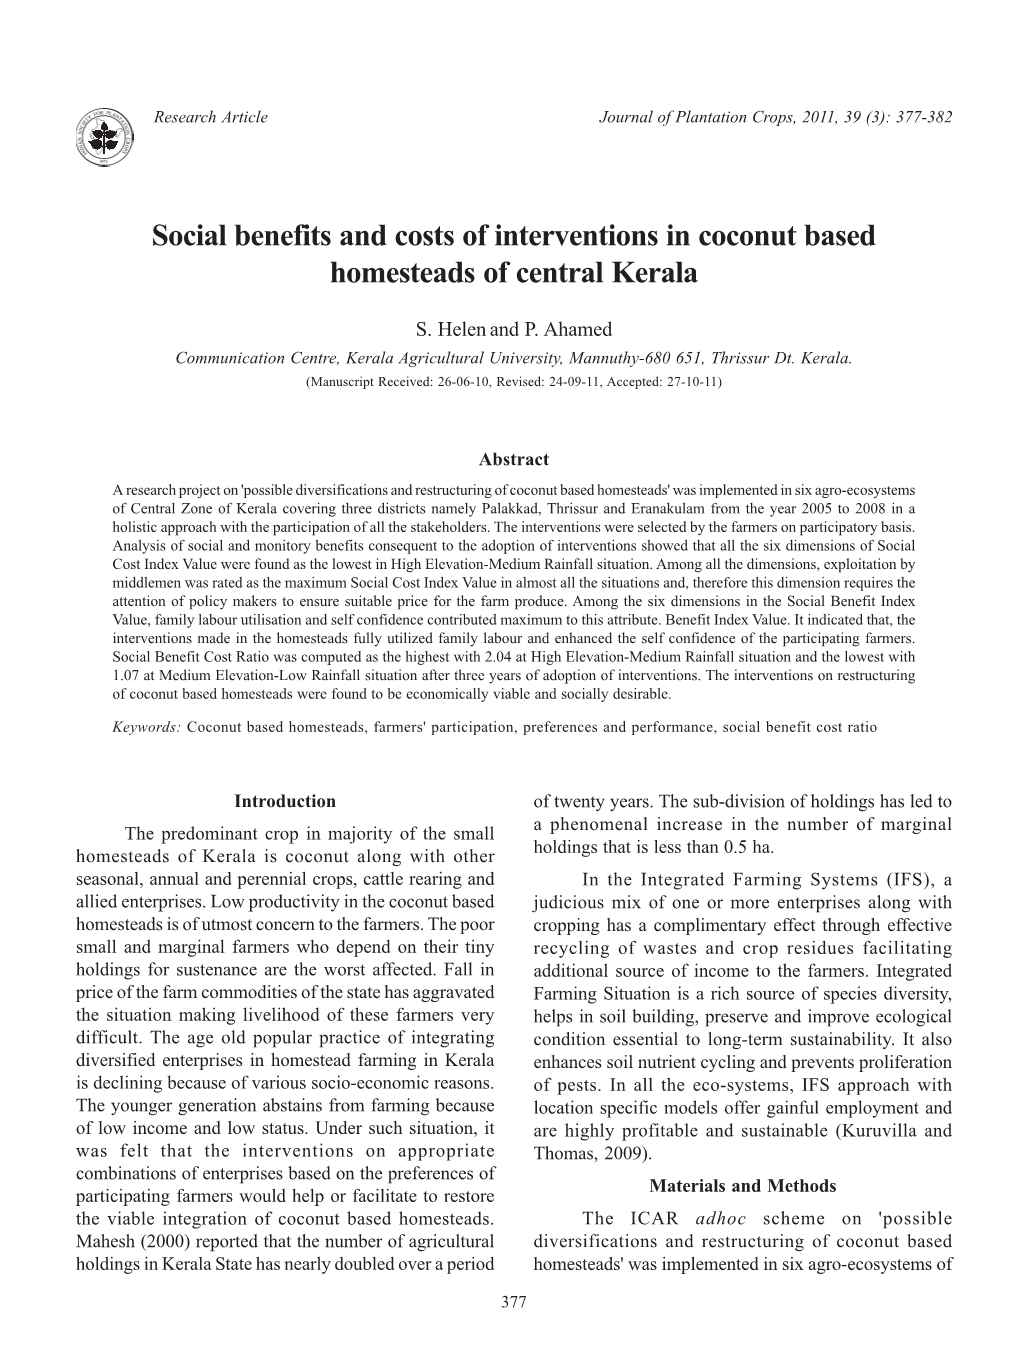 Social Benefits and Costs of Interventions.Pmd